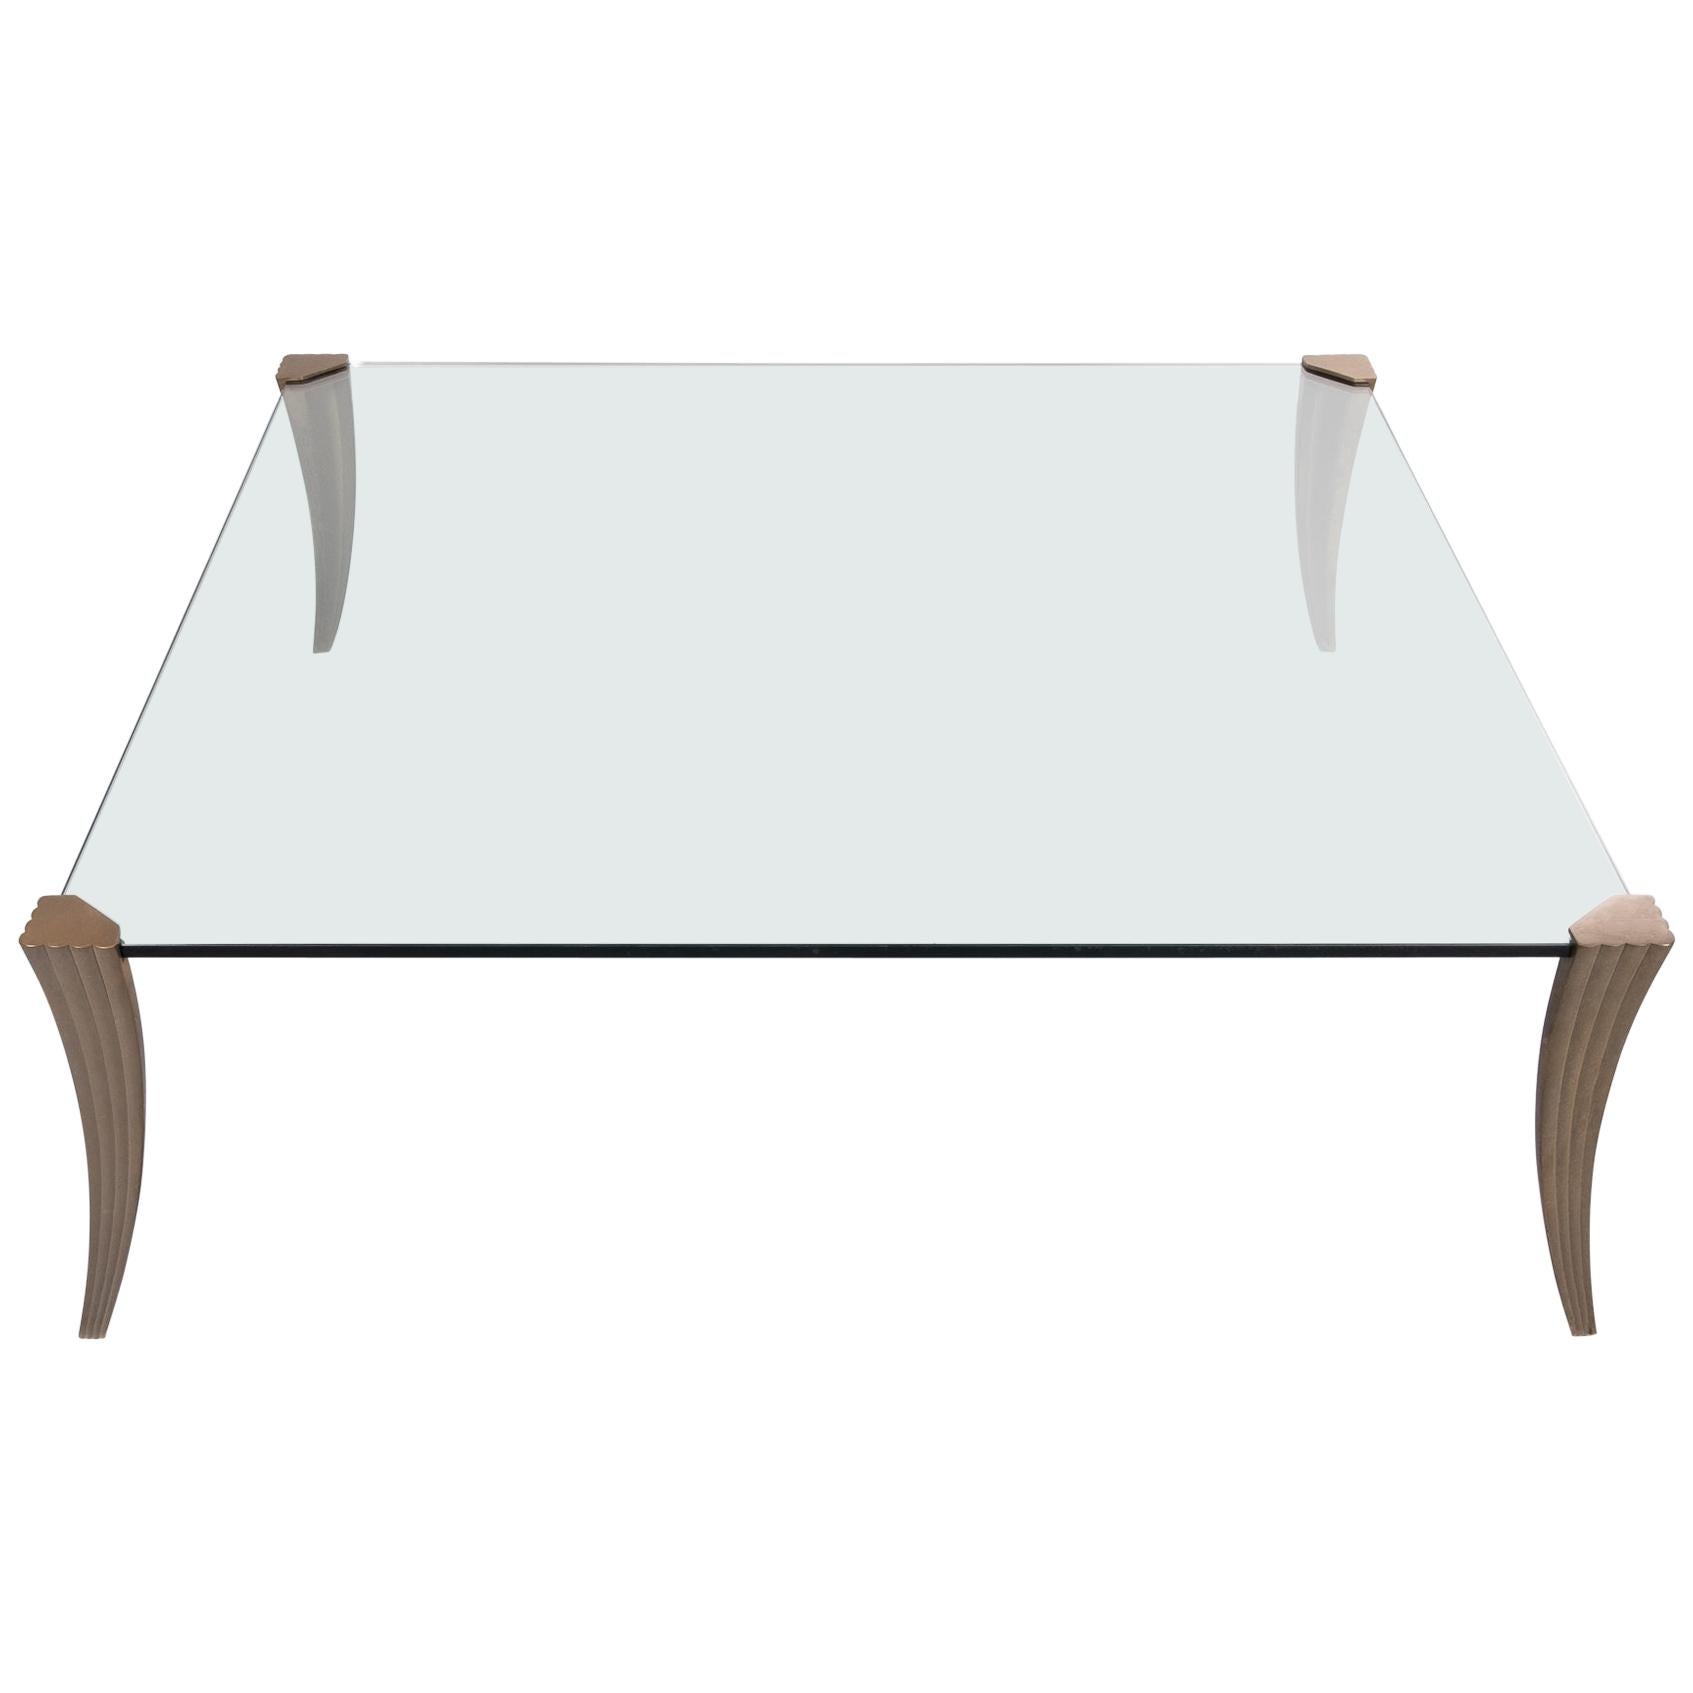 Peter Ghyczy Large Square Coffee Table